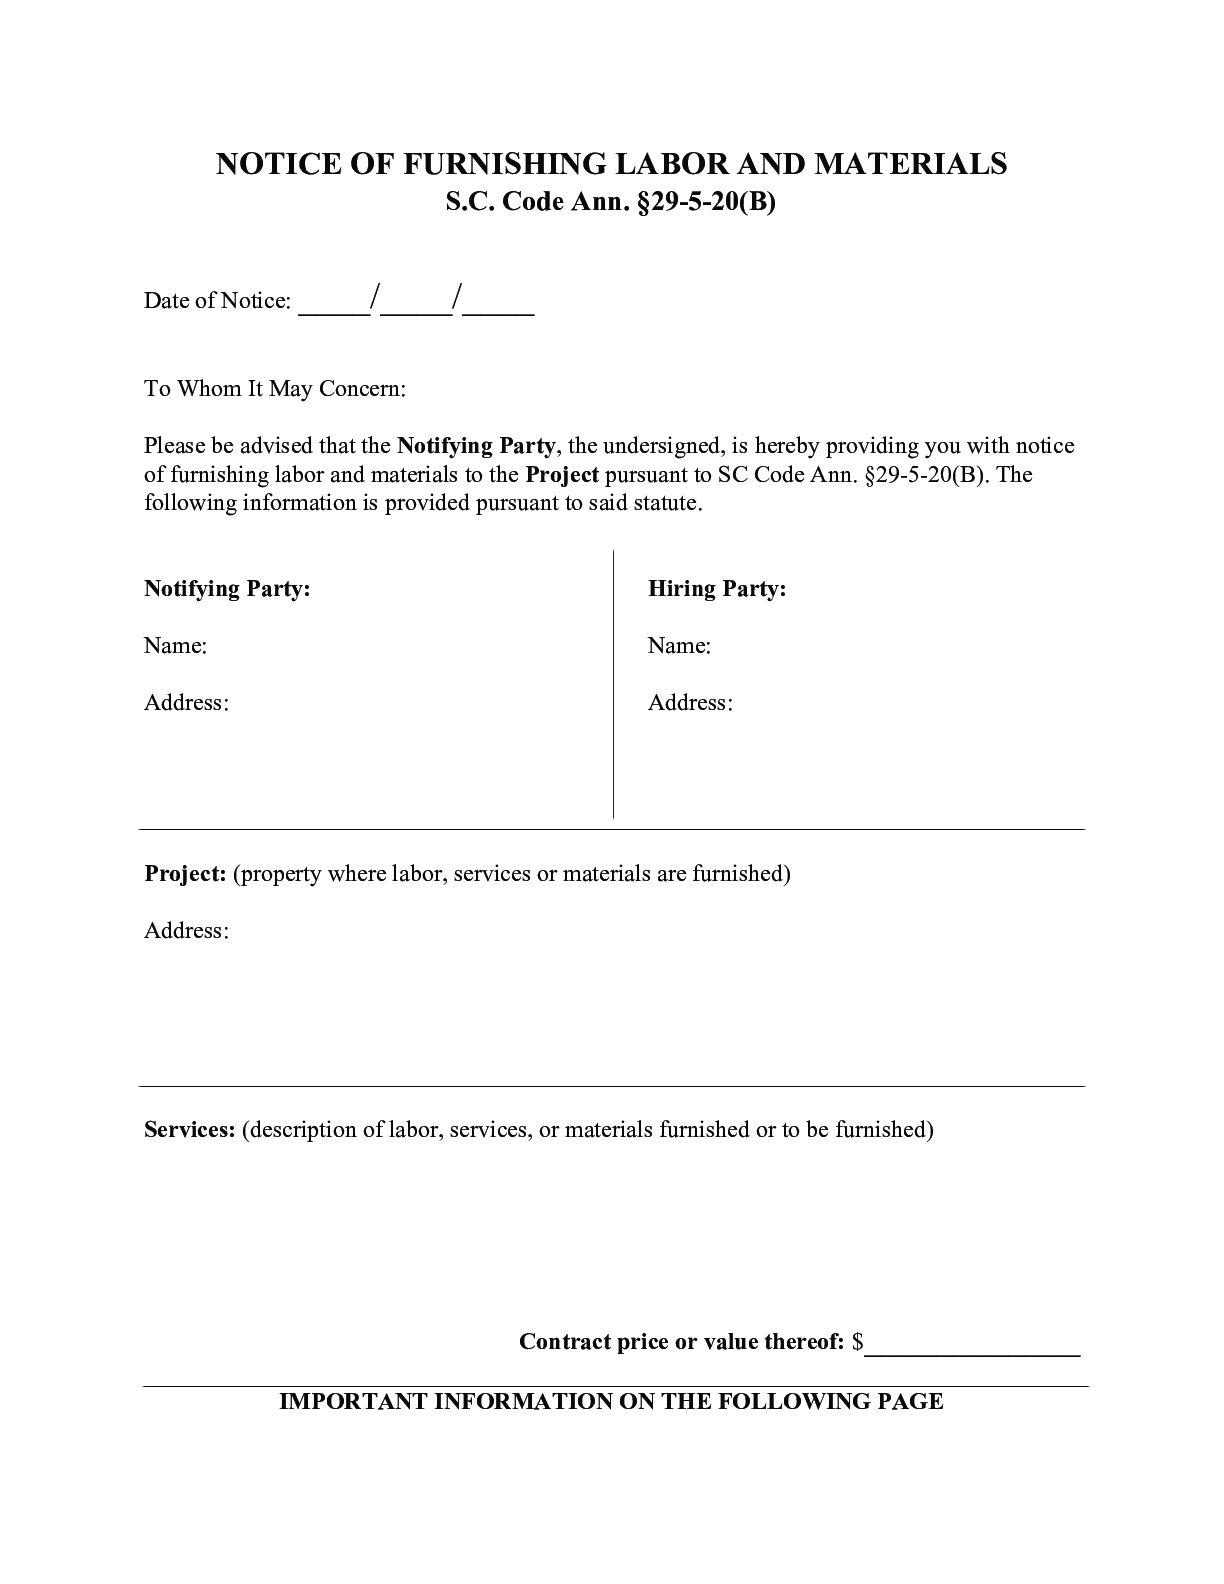 South Carolina Notice of Furnishing Labor and Materials Form - free from